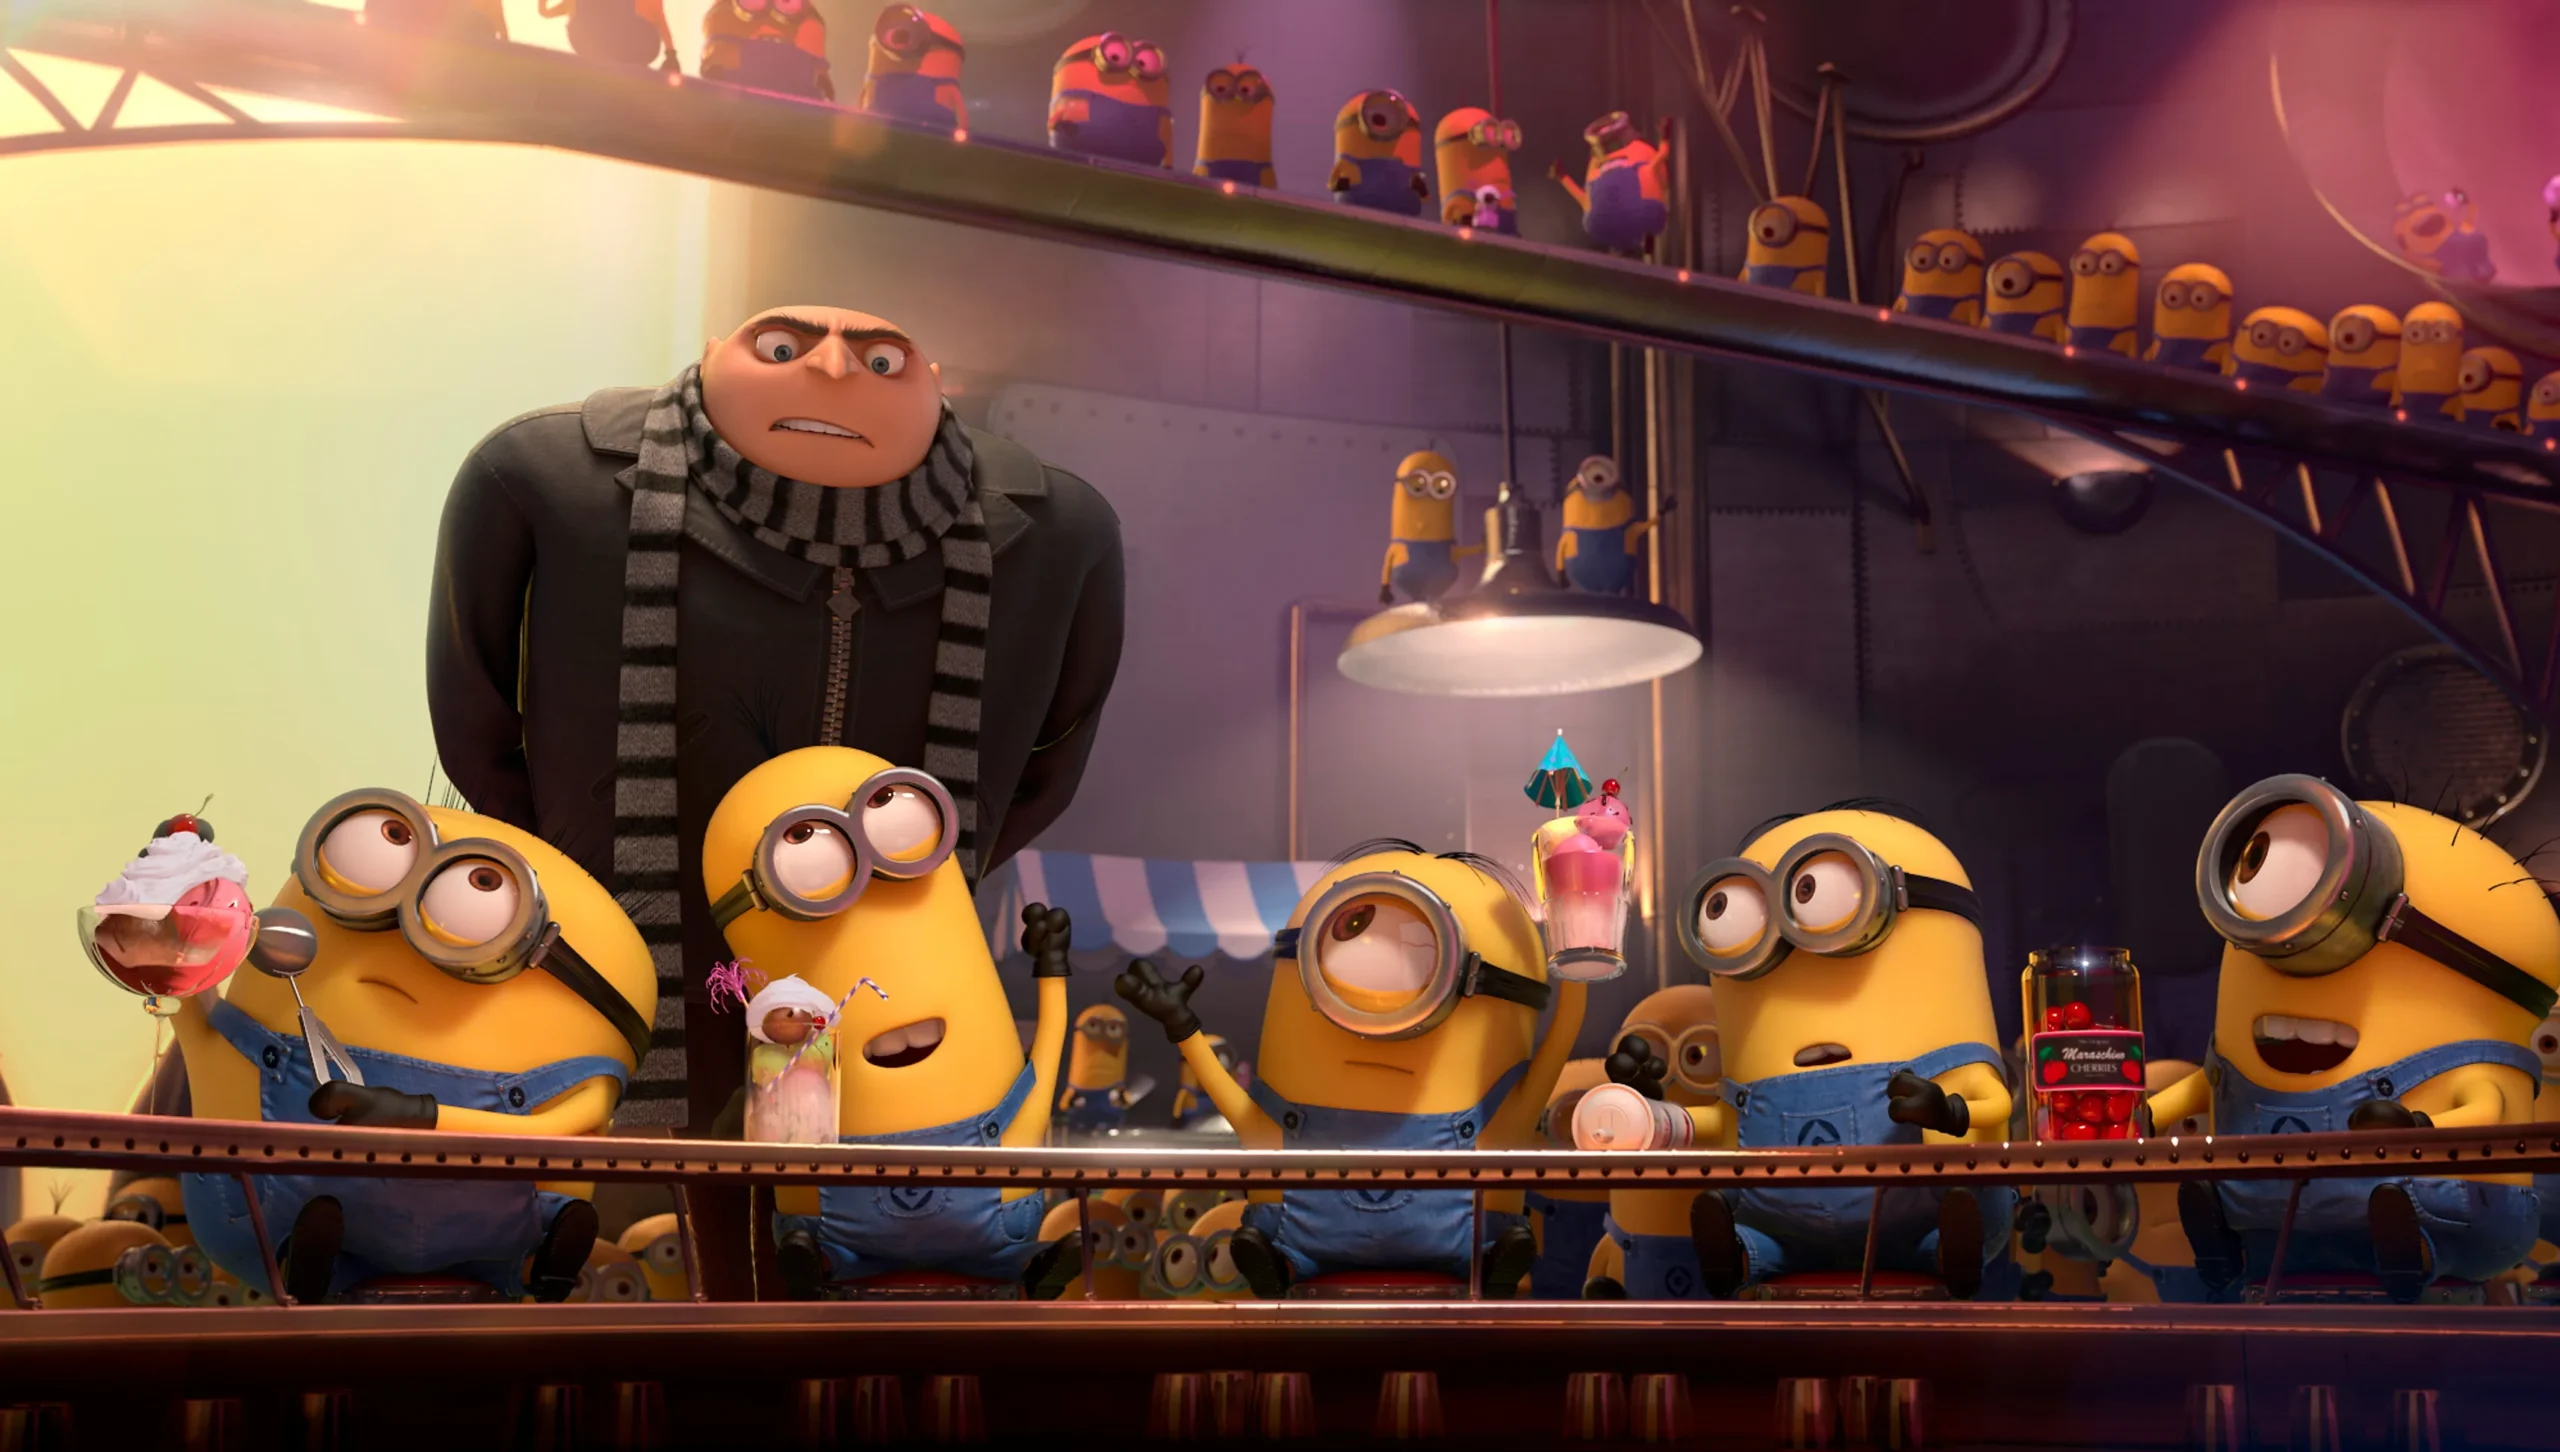 Where to Watch "Despicable Me": An Insider’s Guide